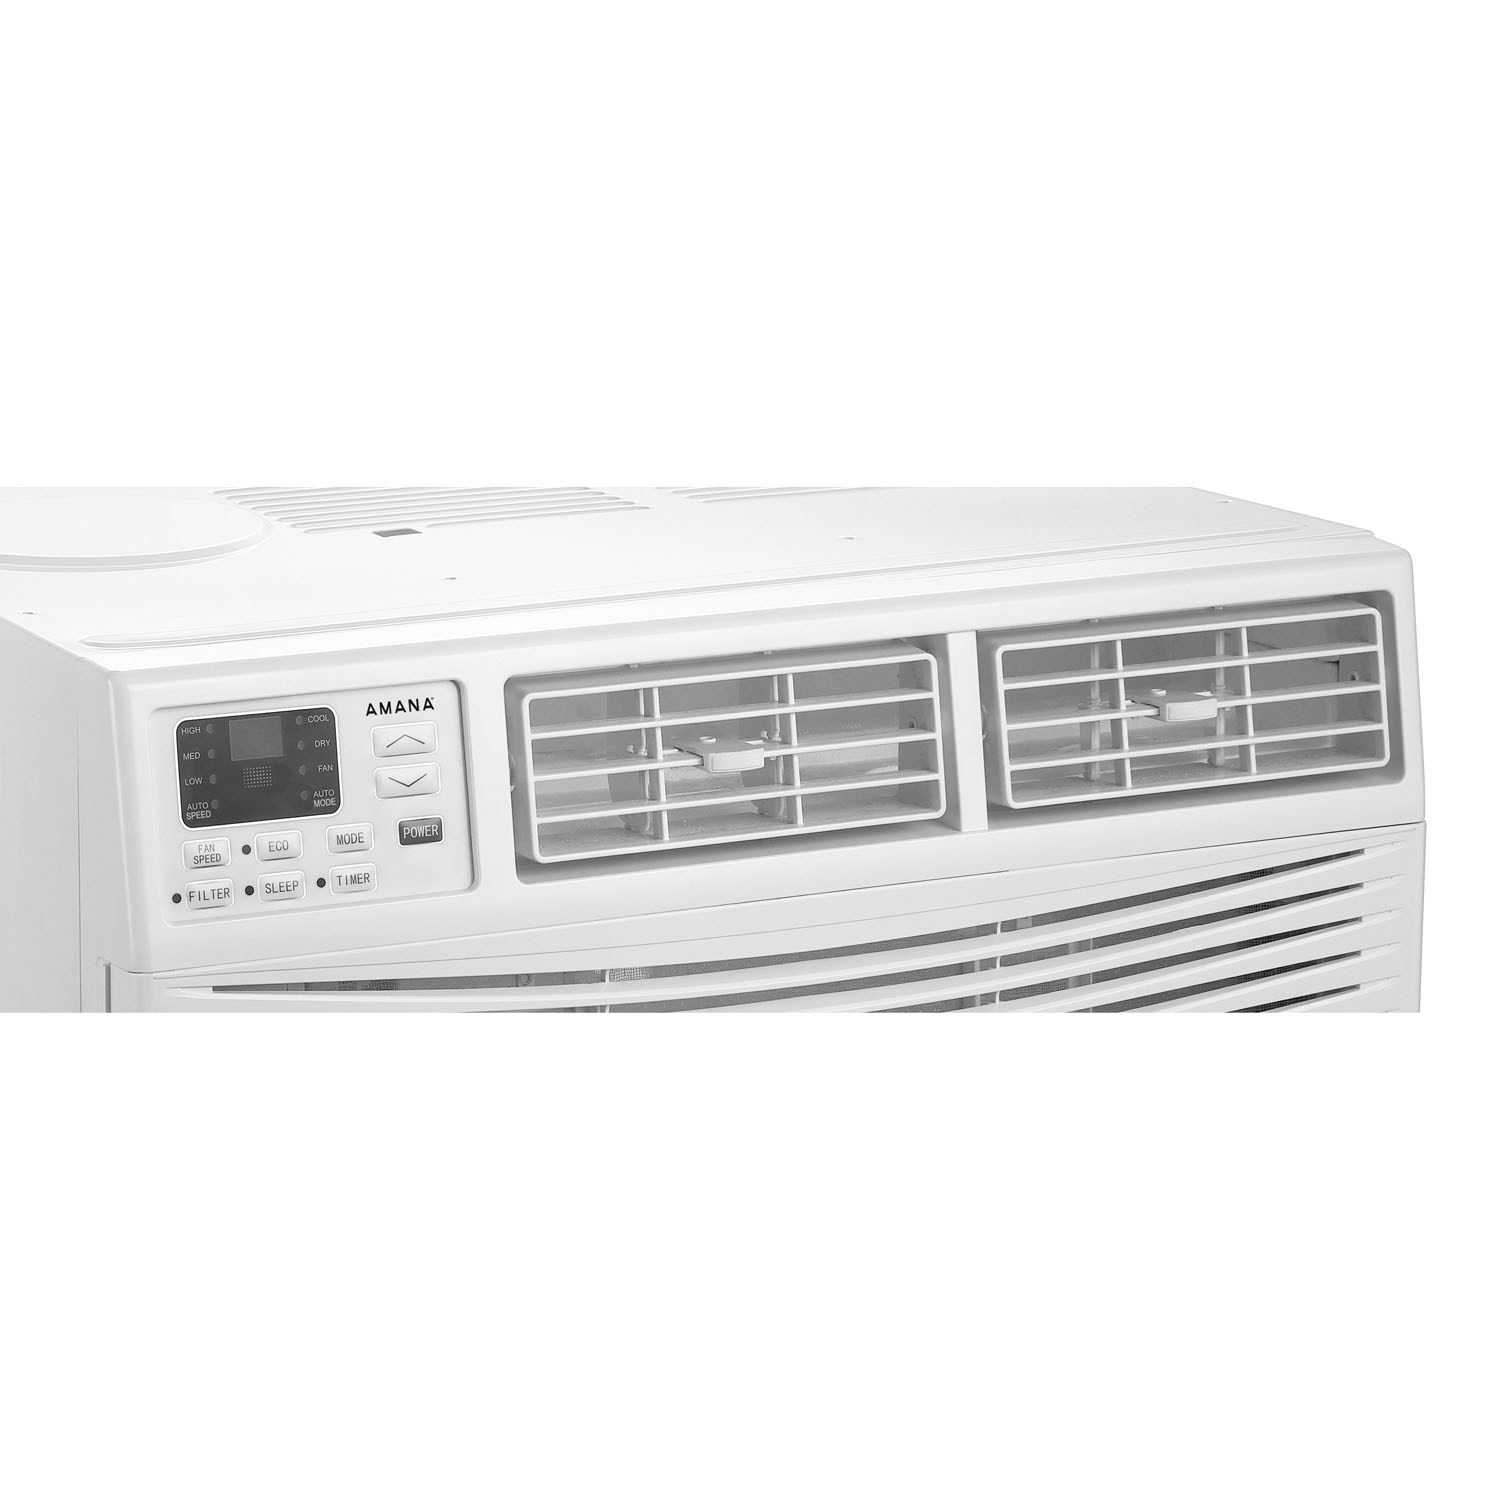 Amana AMAP101BW 10,000 BTU 115V Window-Mounted Air Conditioner with Remote Control - image 4 of 7